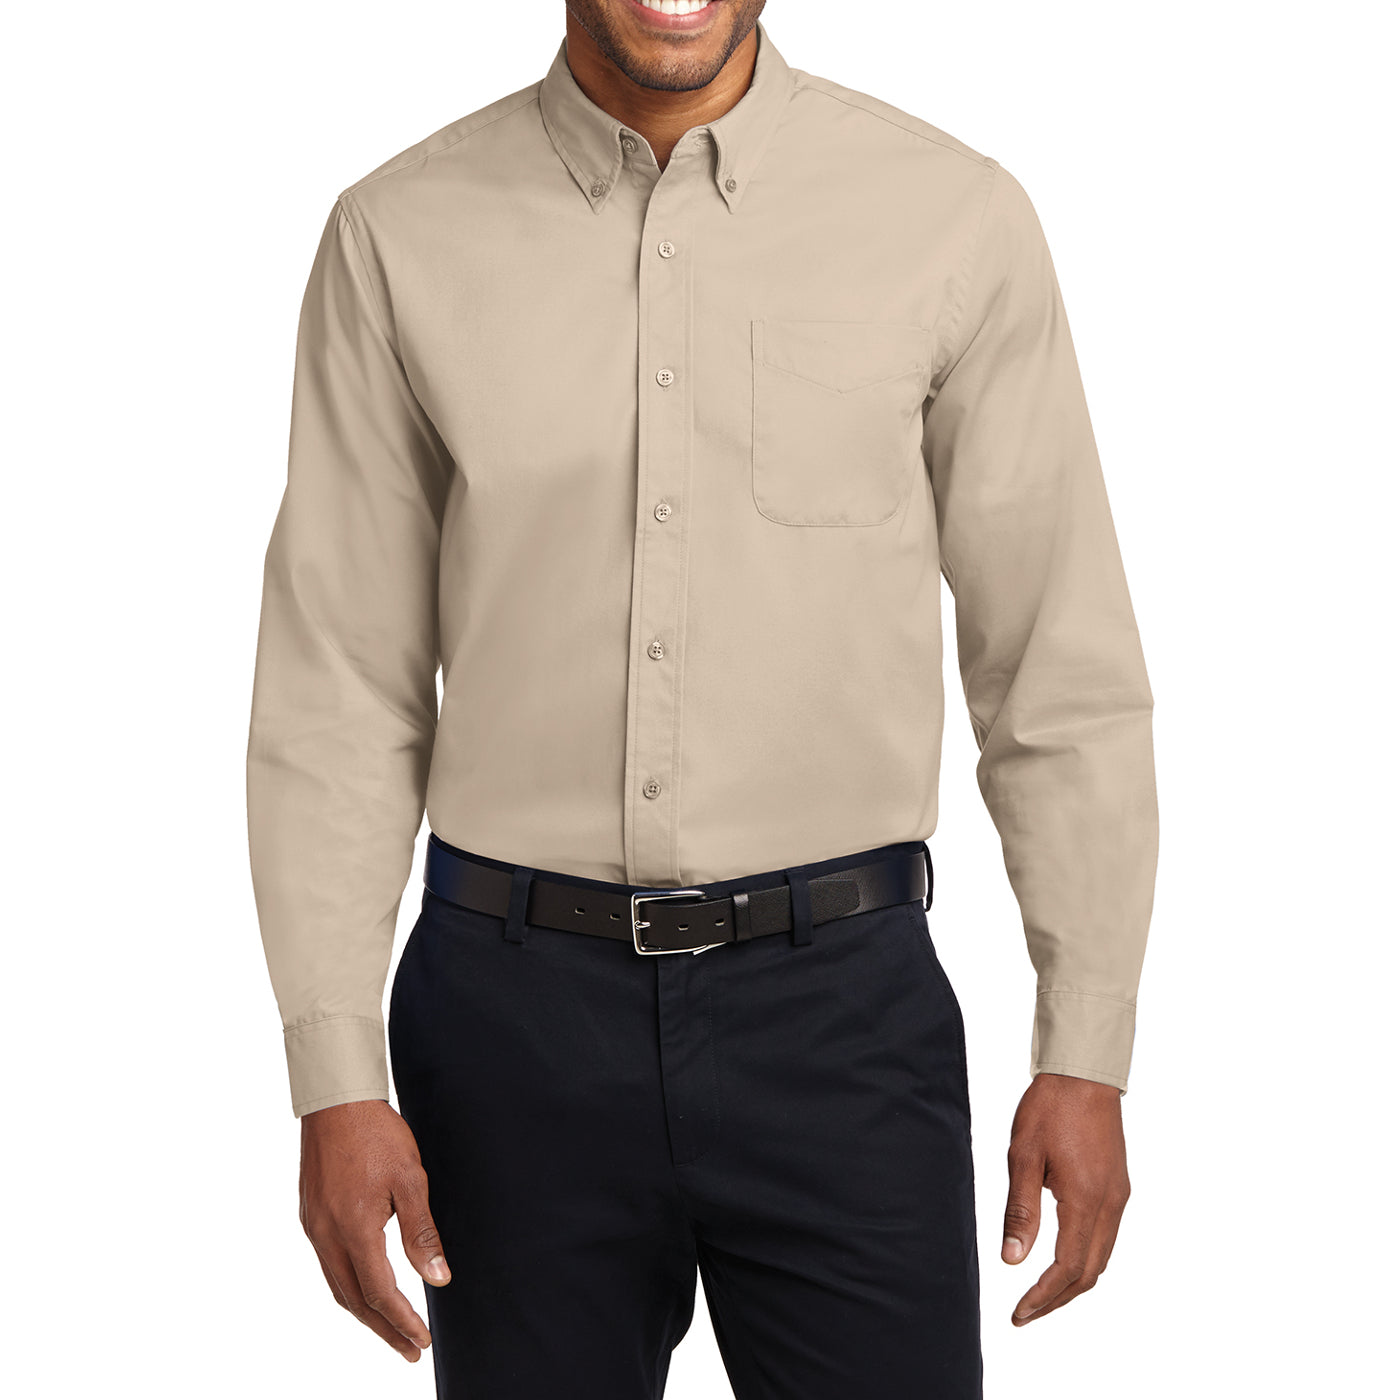 Men's Long Sleeve Easy Care Shirt - Stone - Front